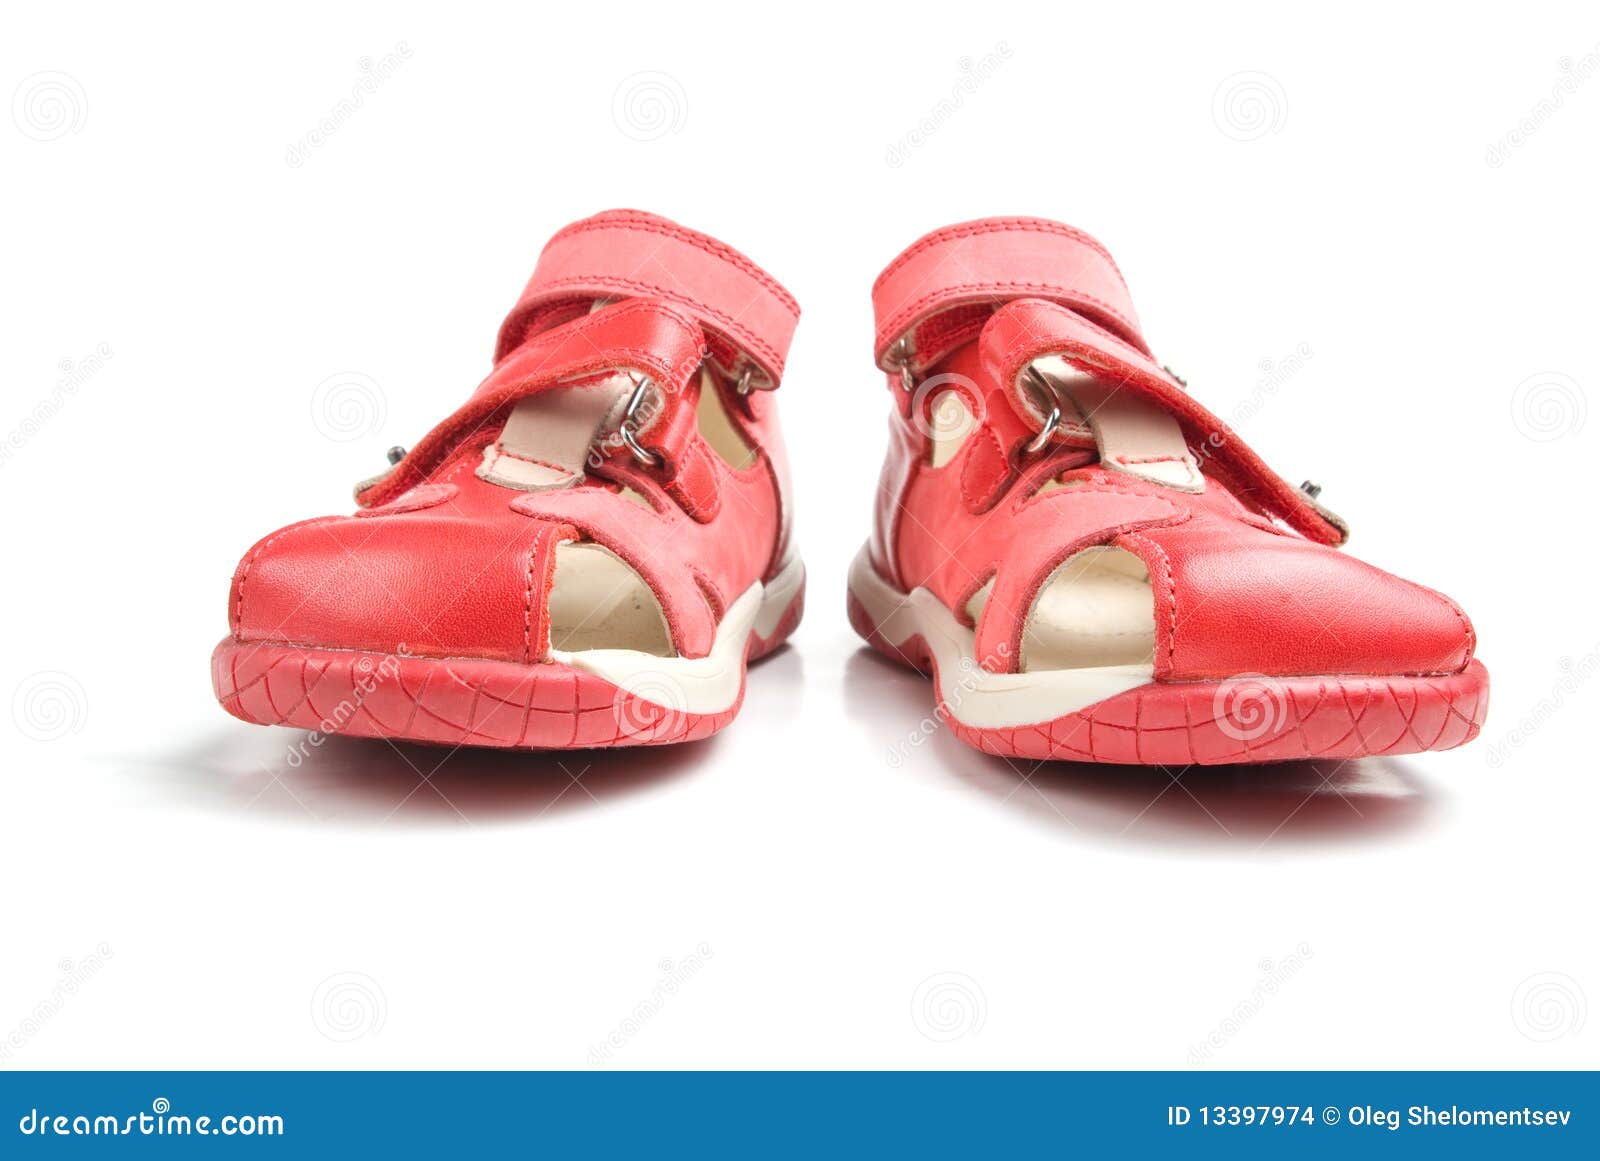 Little red kids shoes. stock photo. Image of objects - 13397974